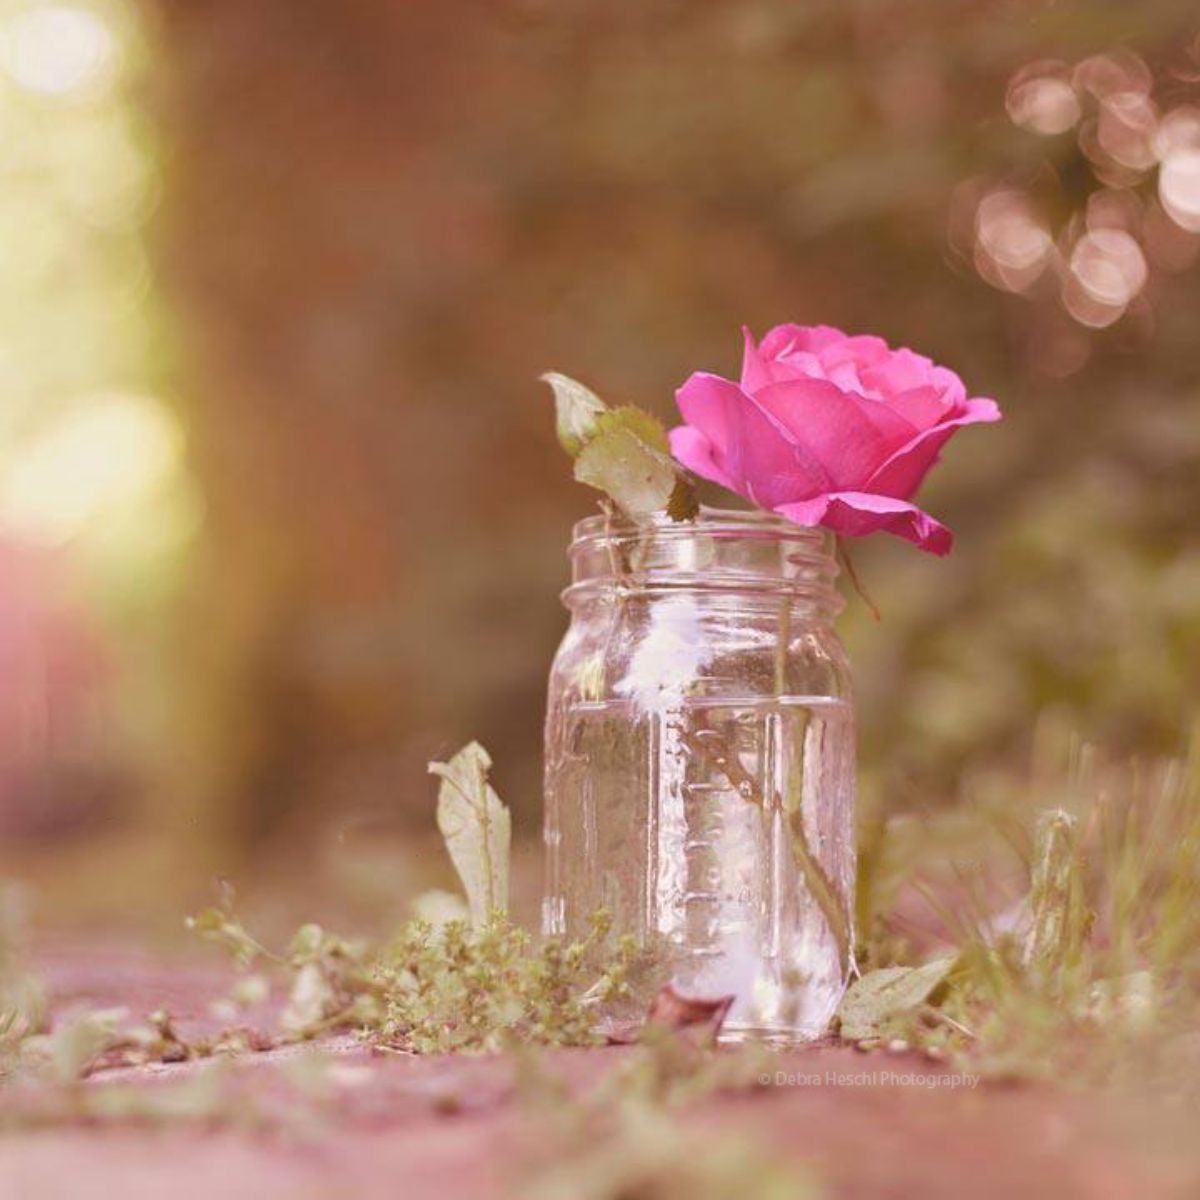 Image of a mason jar in the pathway with a single rose captured by Debra (Dusty) Heschl Photography.